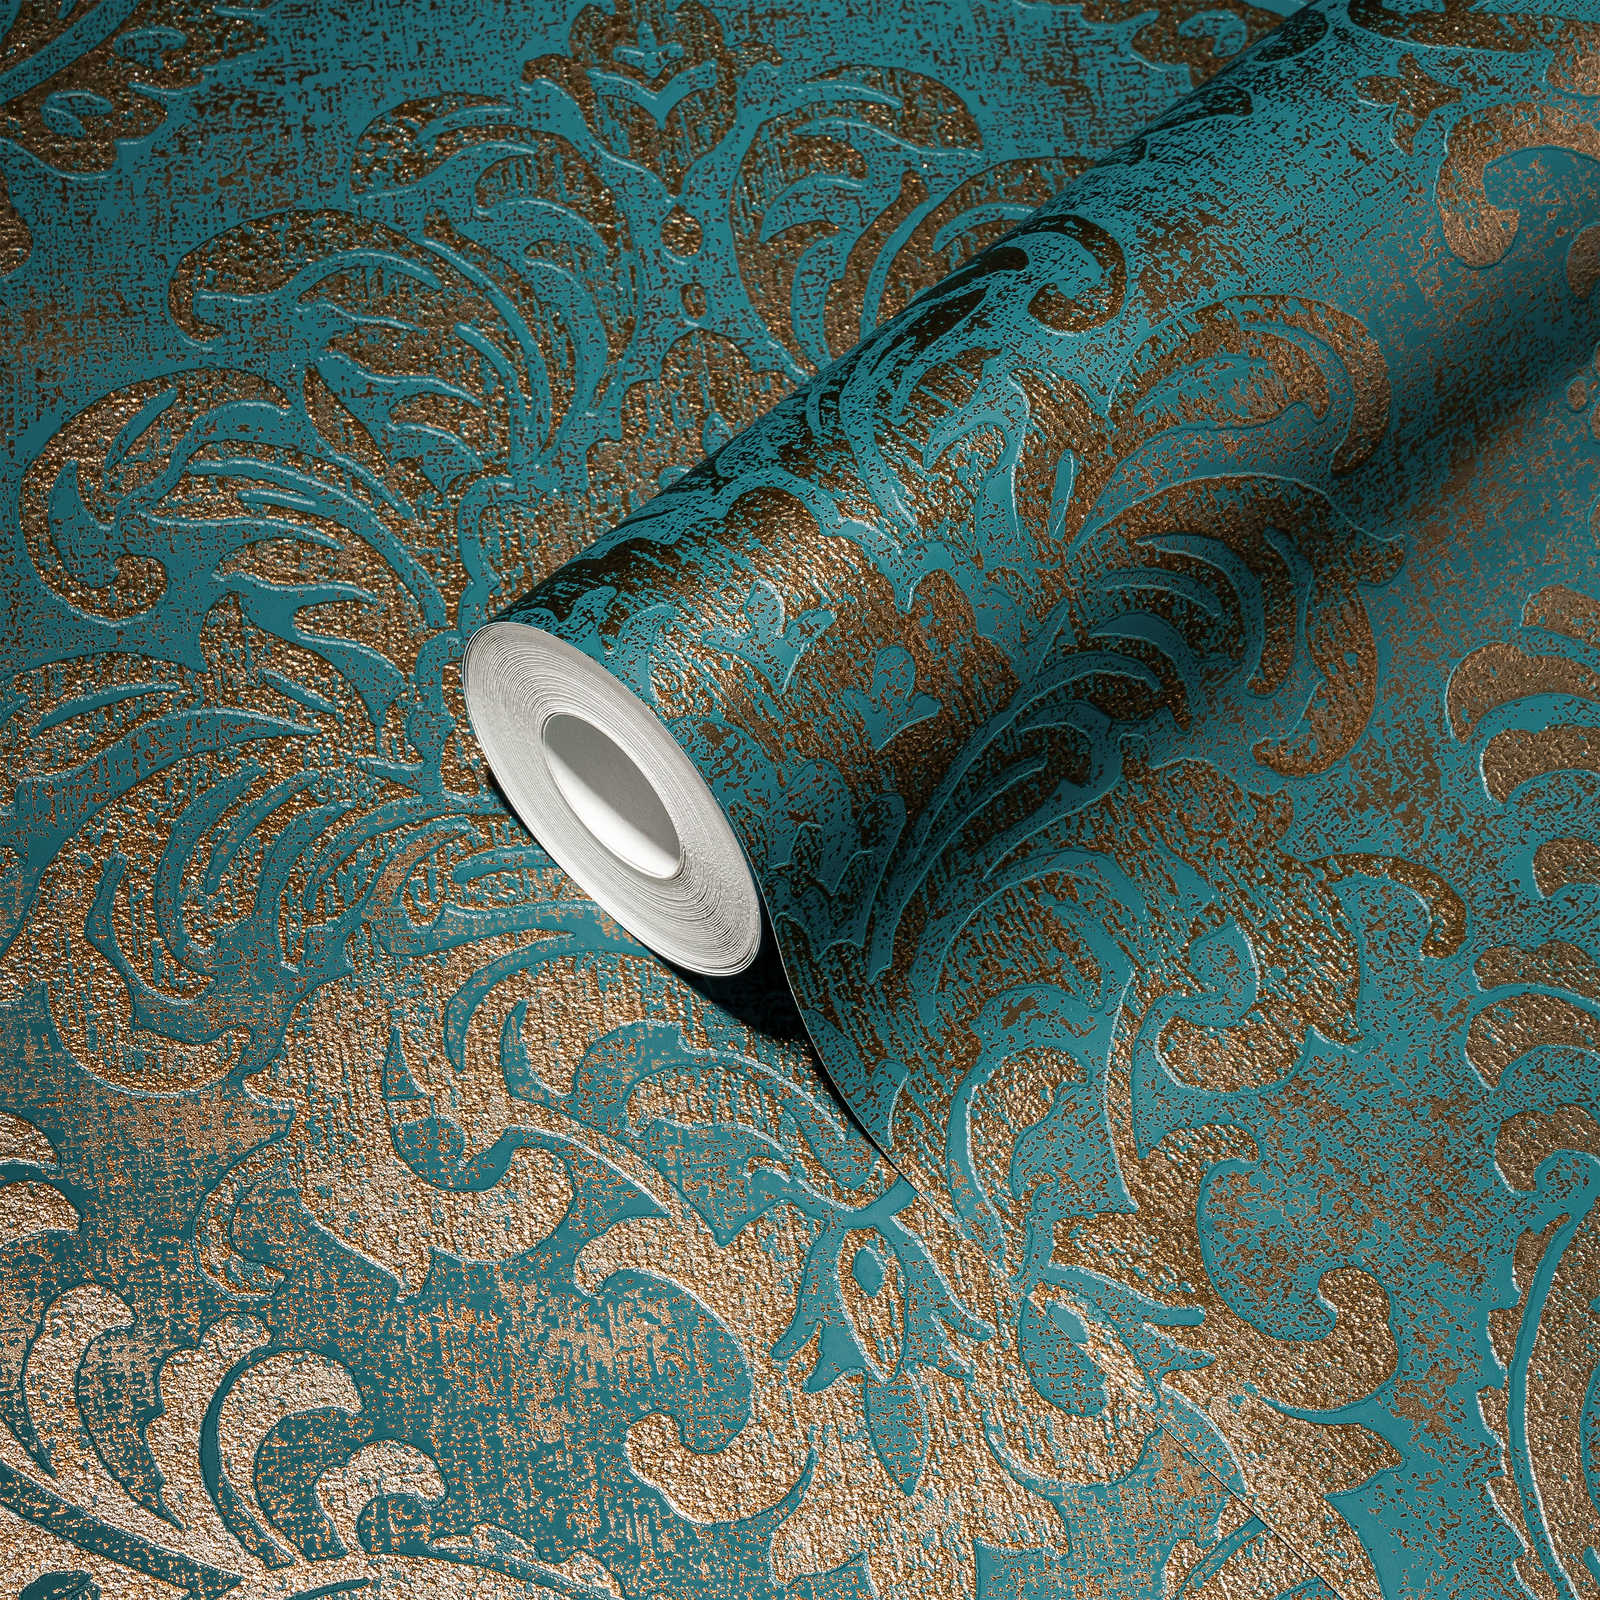             Non-woven wallpaper in used look with ornaments & metallic look - petrol, gold
        